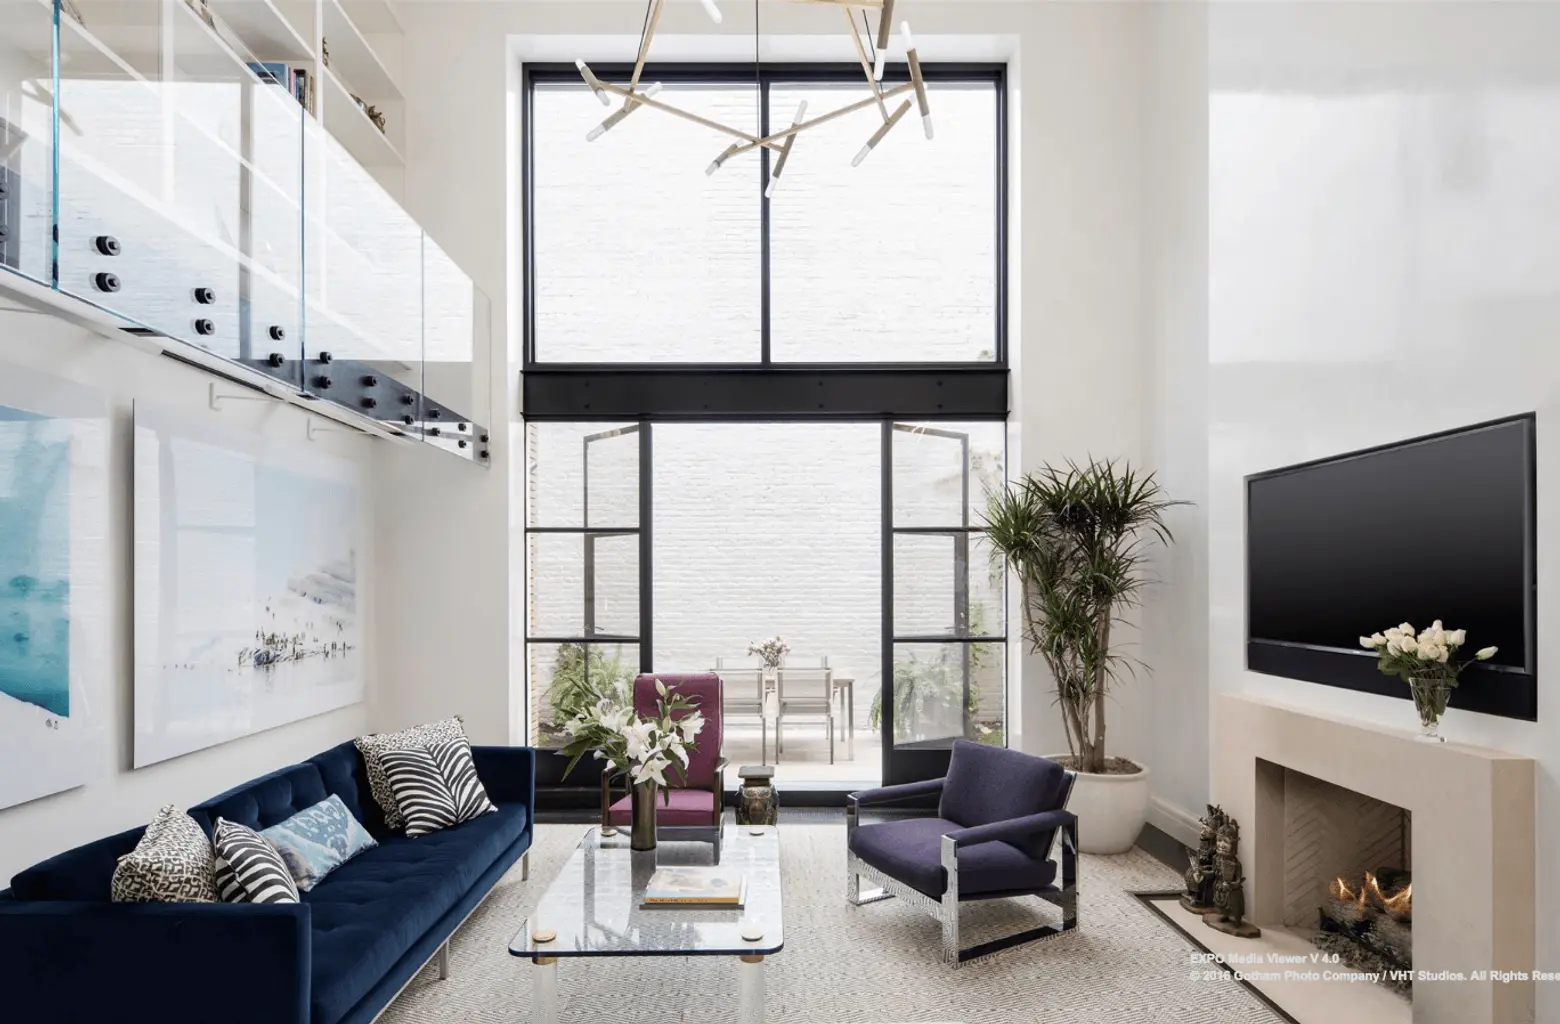 $14.5M West Village townhouse survived a designer renovation with historic details intact